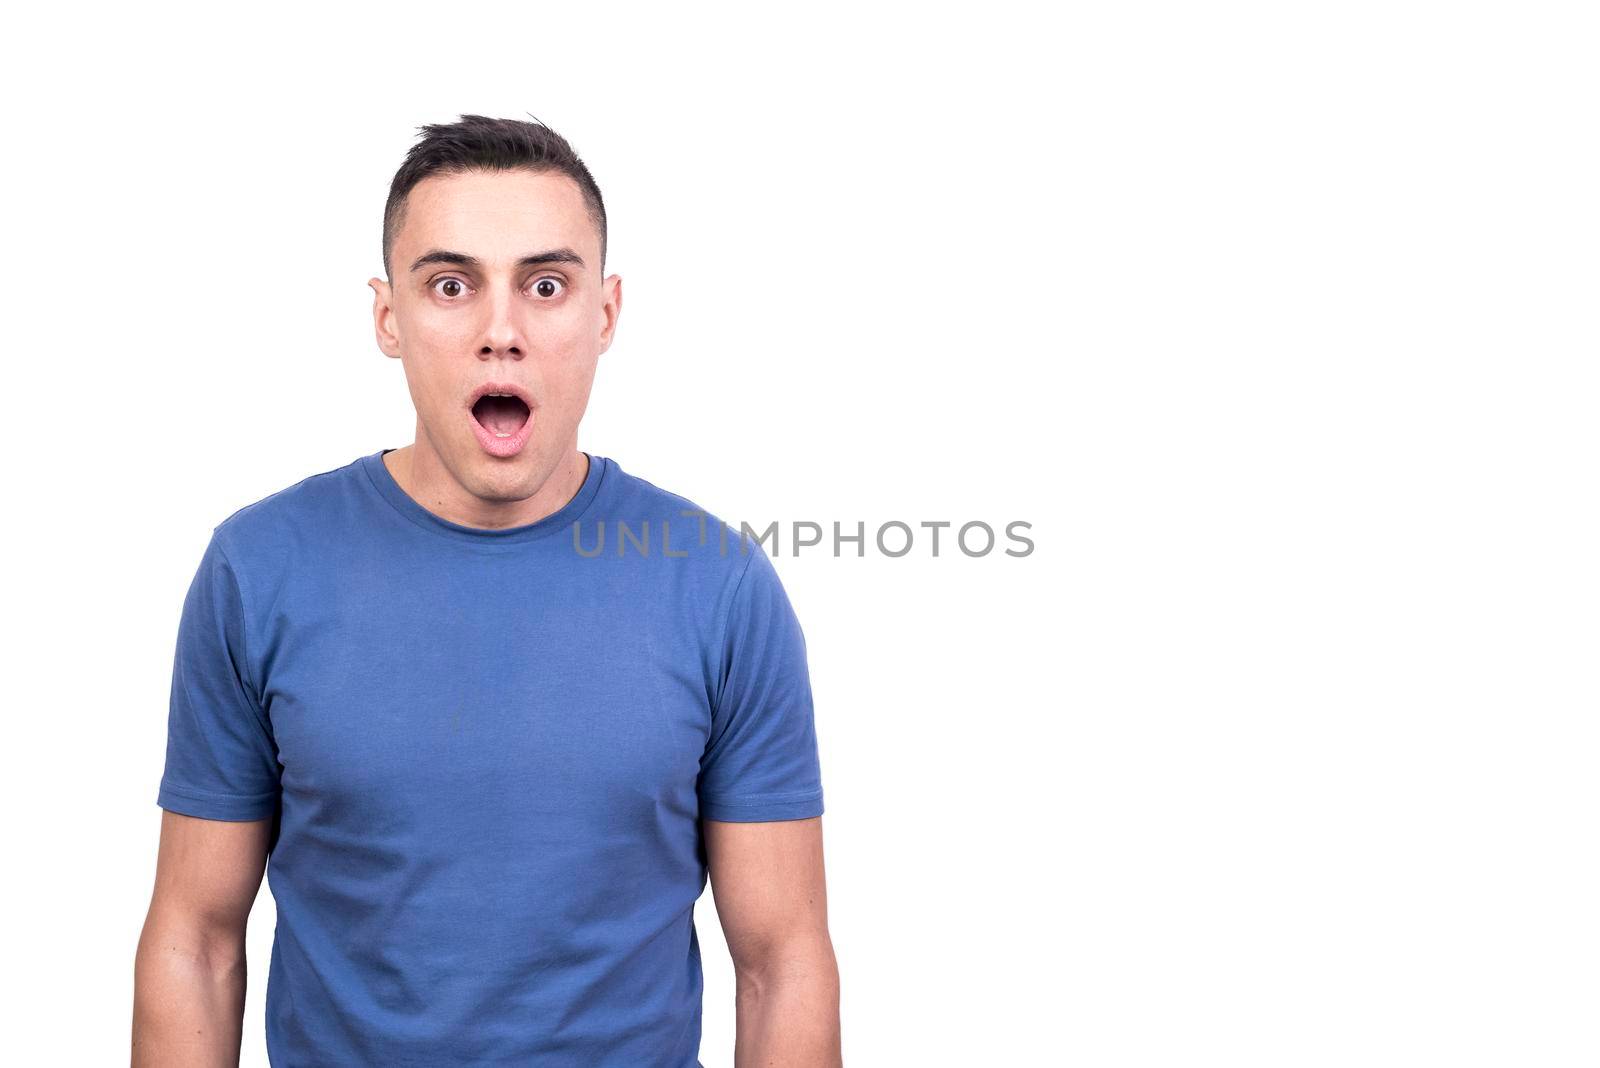 Studio portrait with white background of a man opening the mouth with expression of surprise